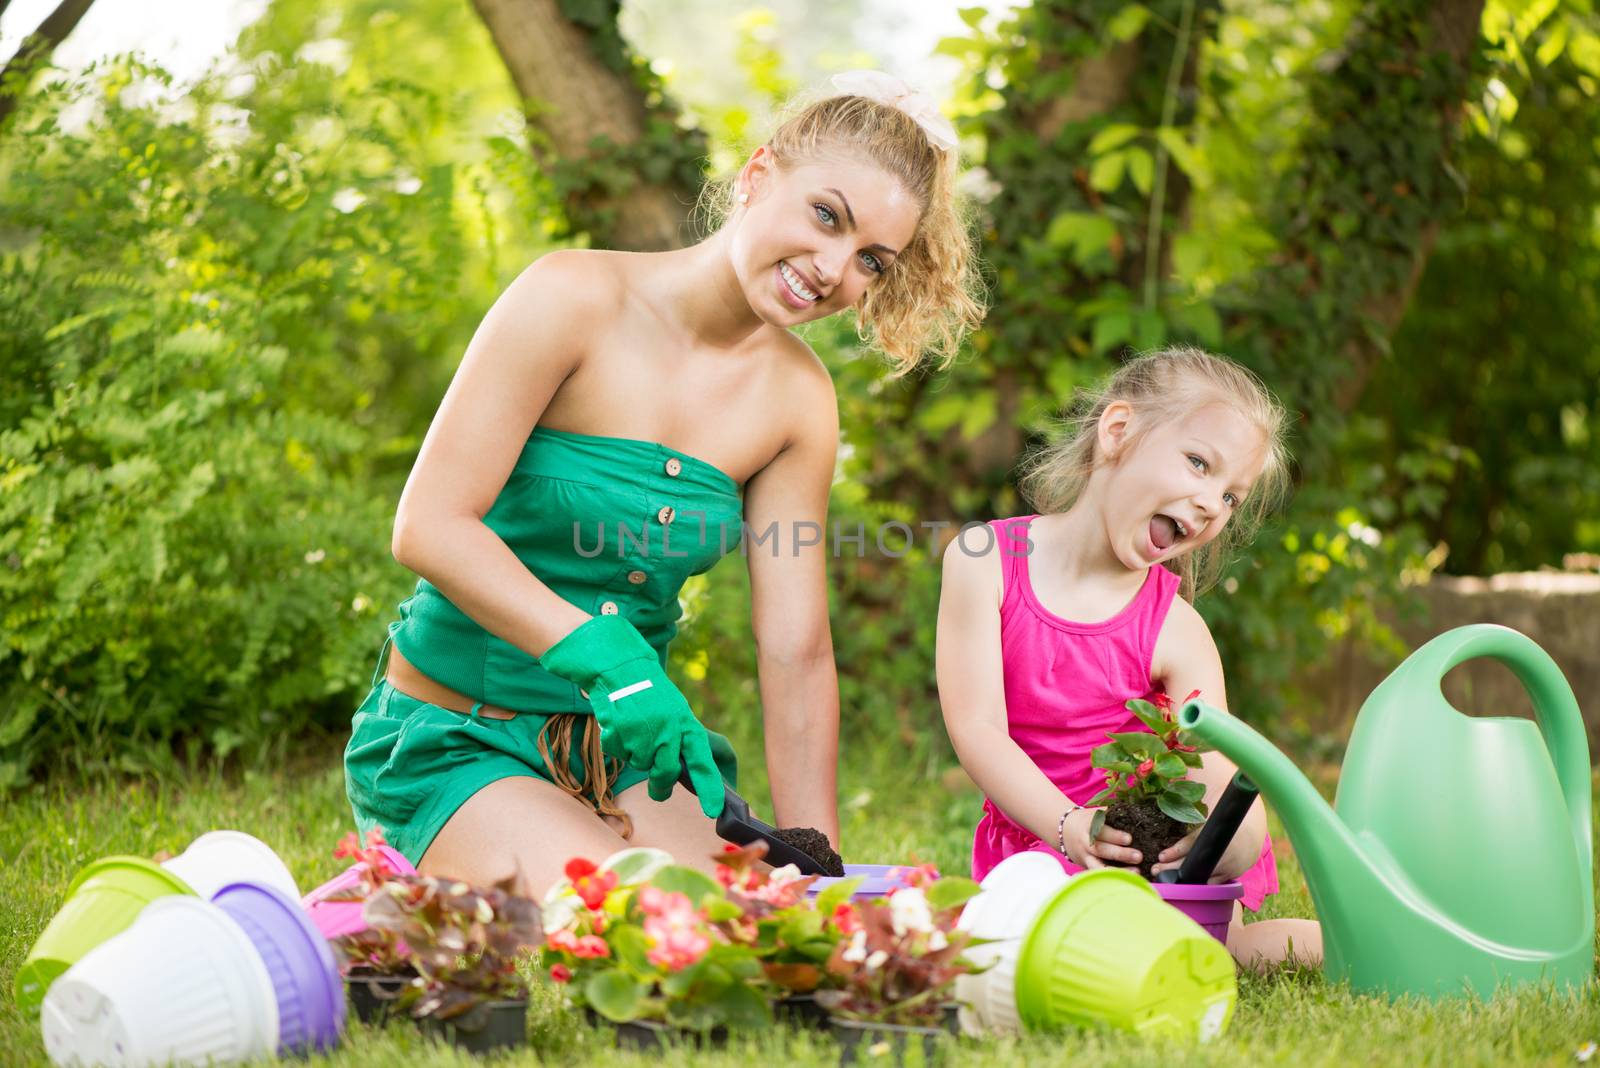 Beautiful mother and daughter planting flowers in the garden.